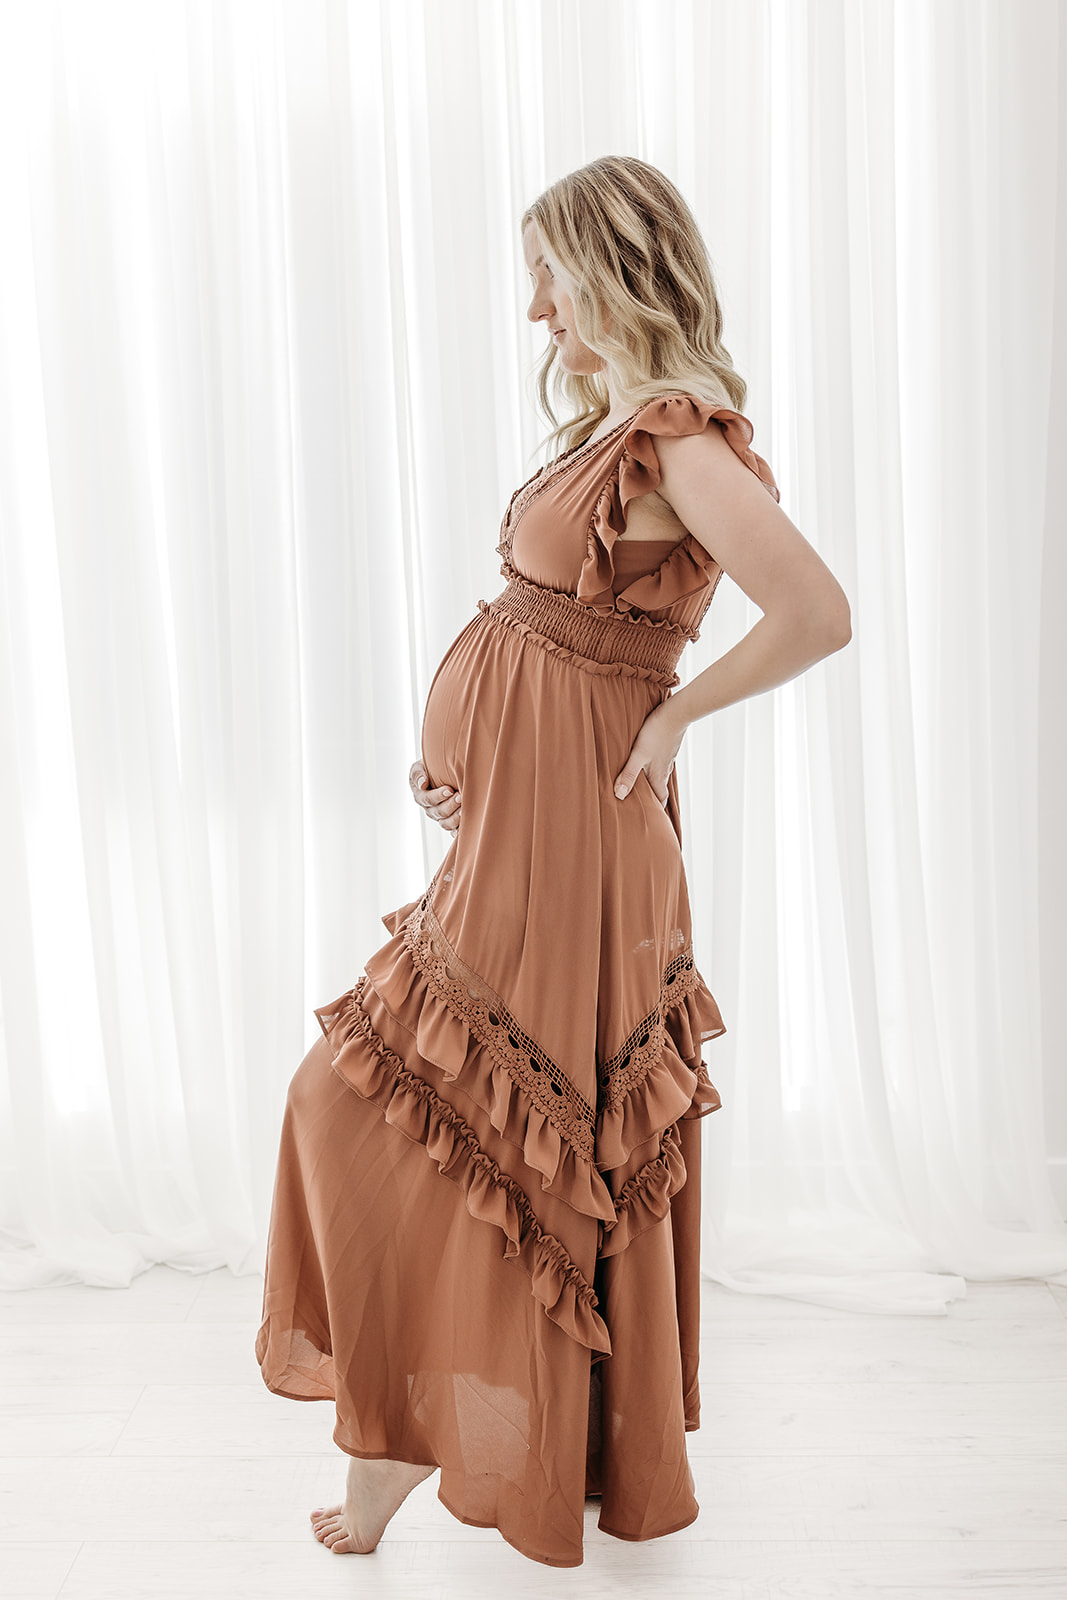 A mother to be stands barefoot in a studio in front of a large window holding her bump in a brown maternity dress HSHS Eau Claire